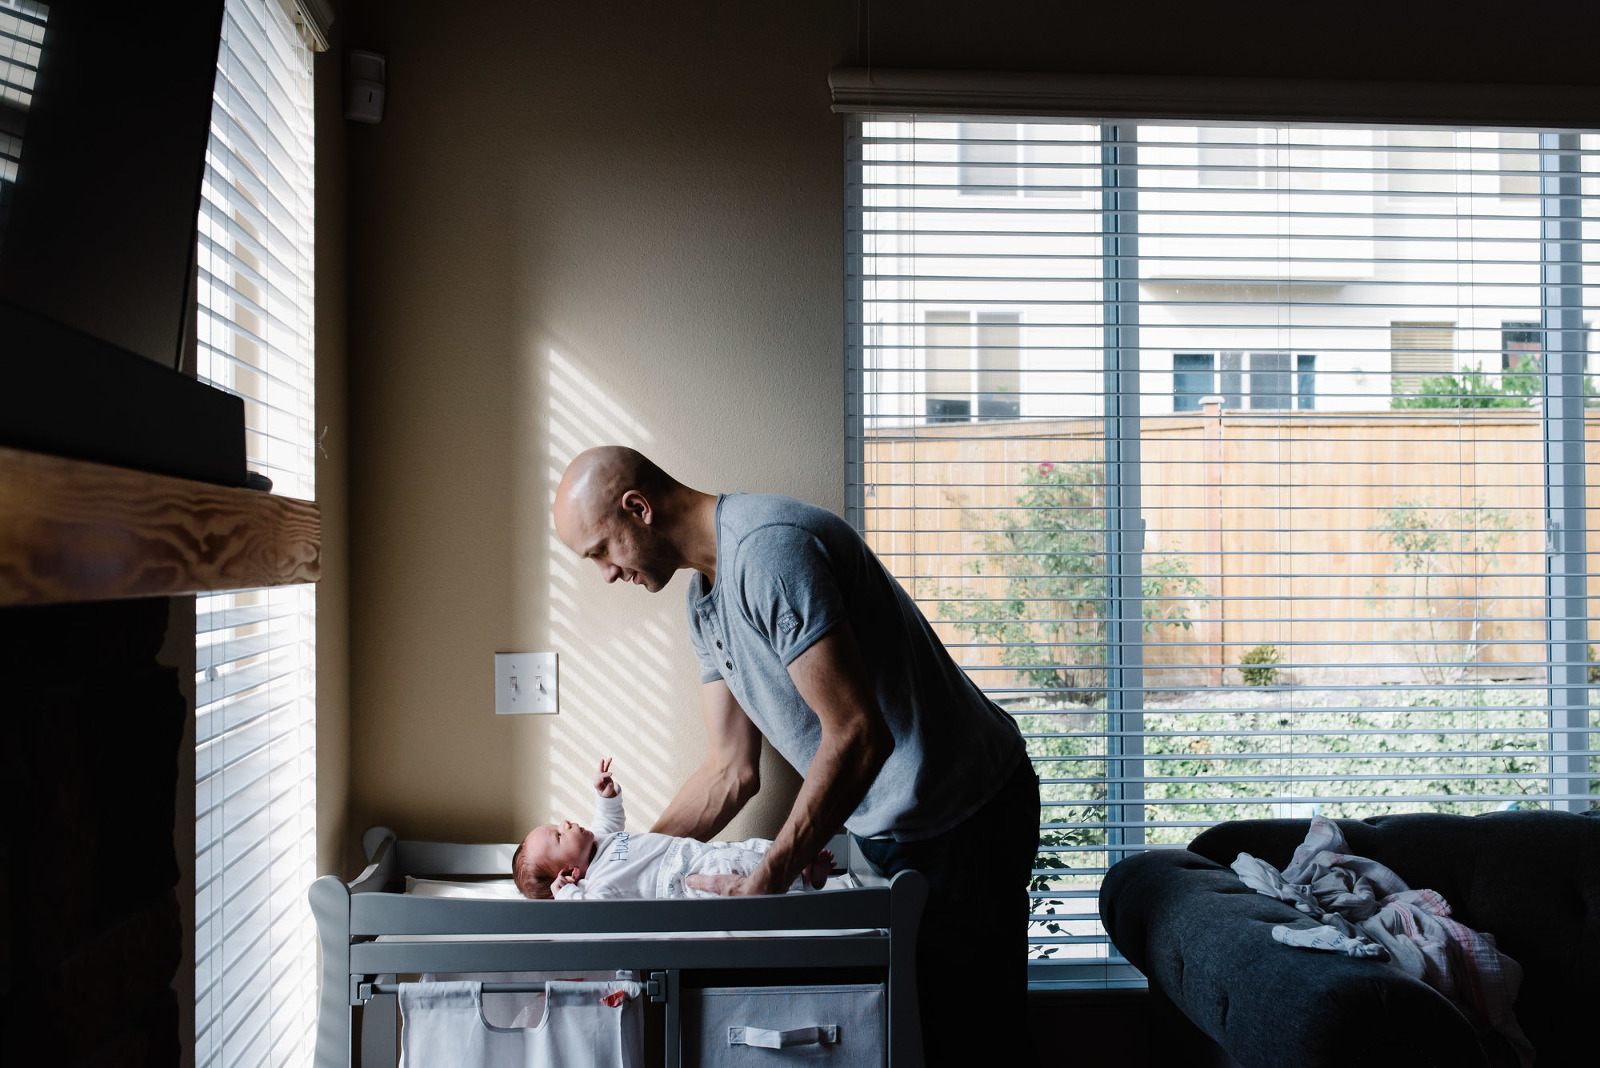 father picks up baby from changing table